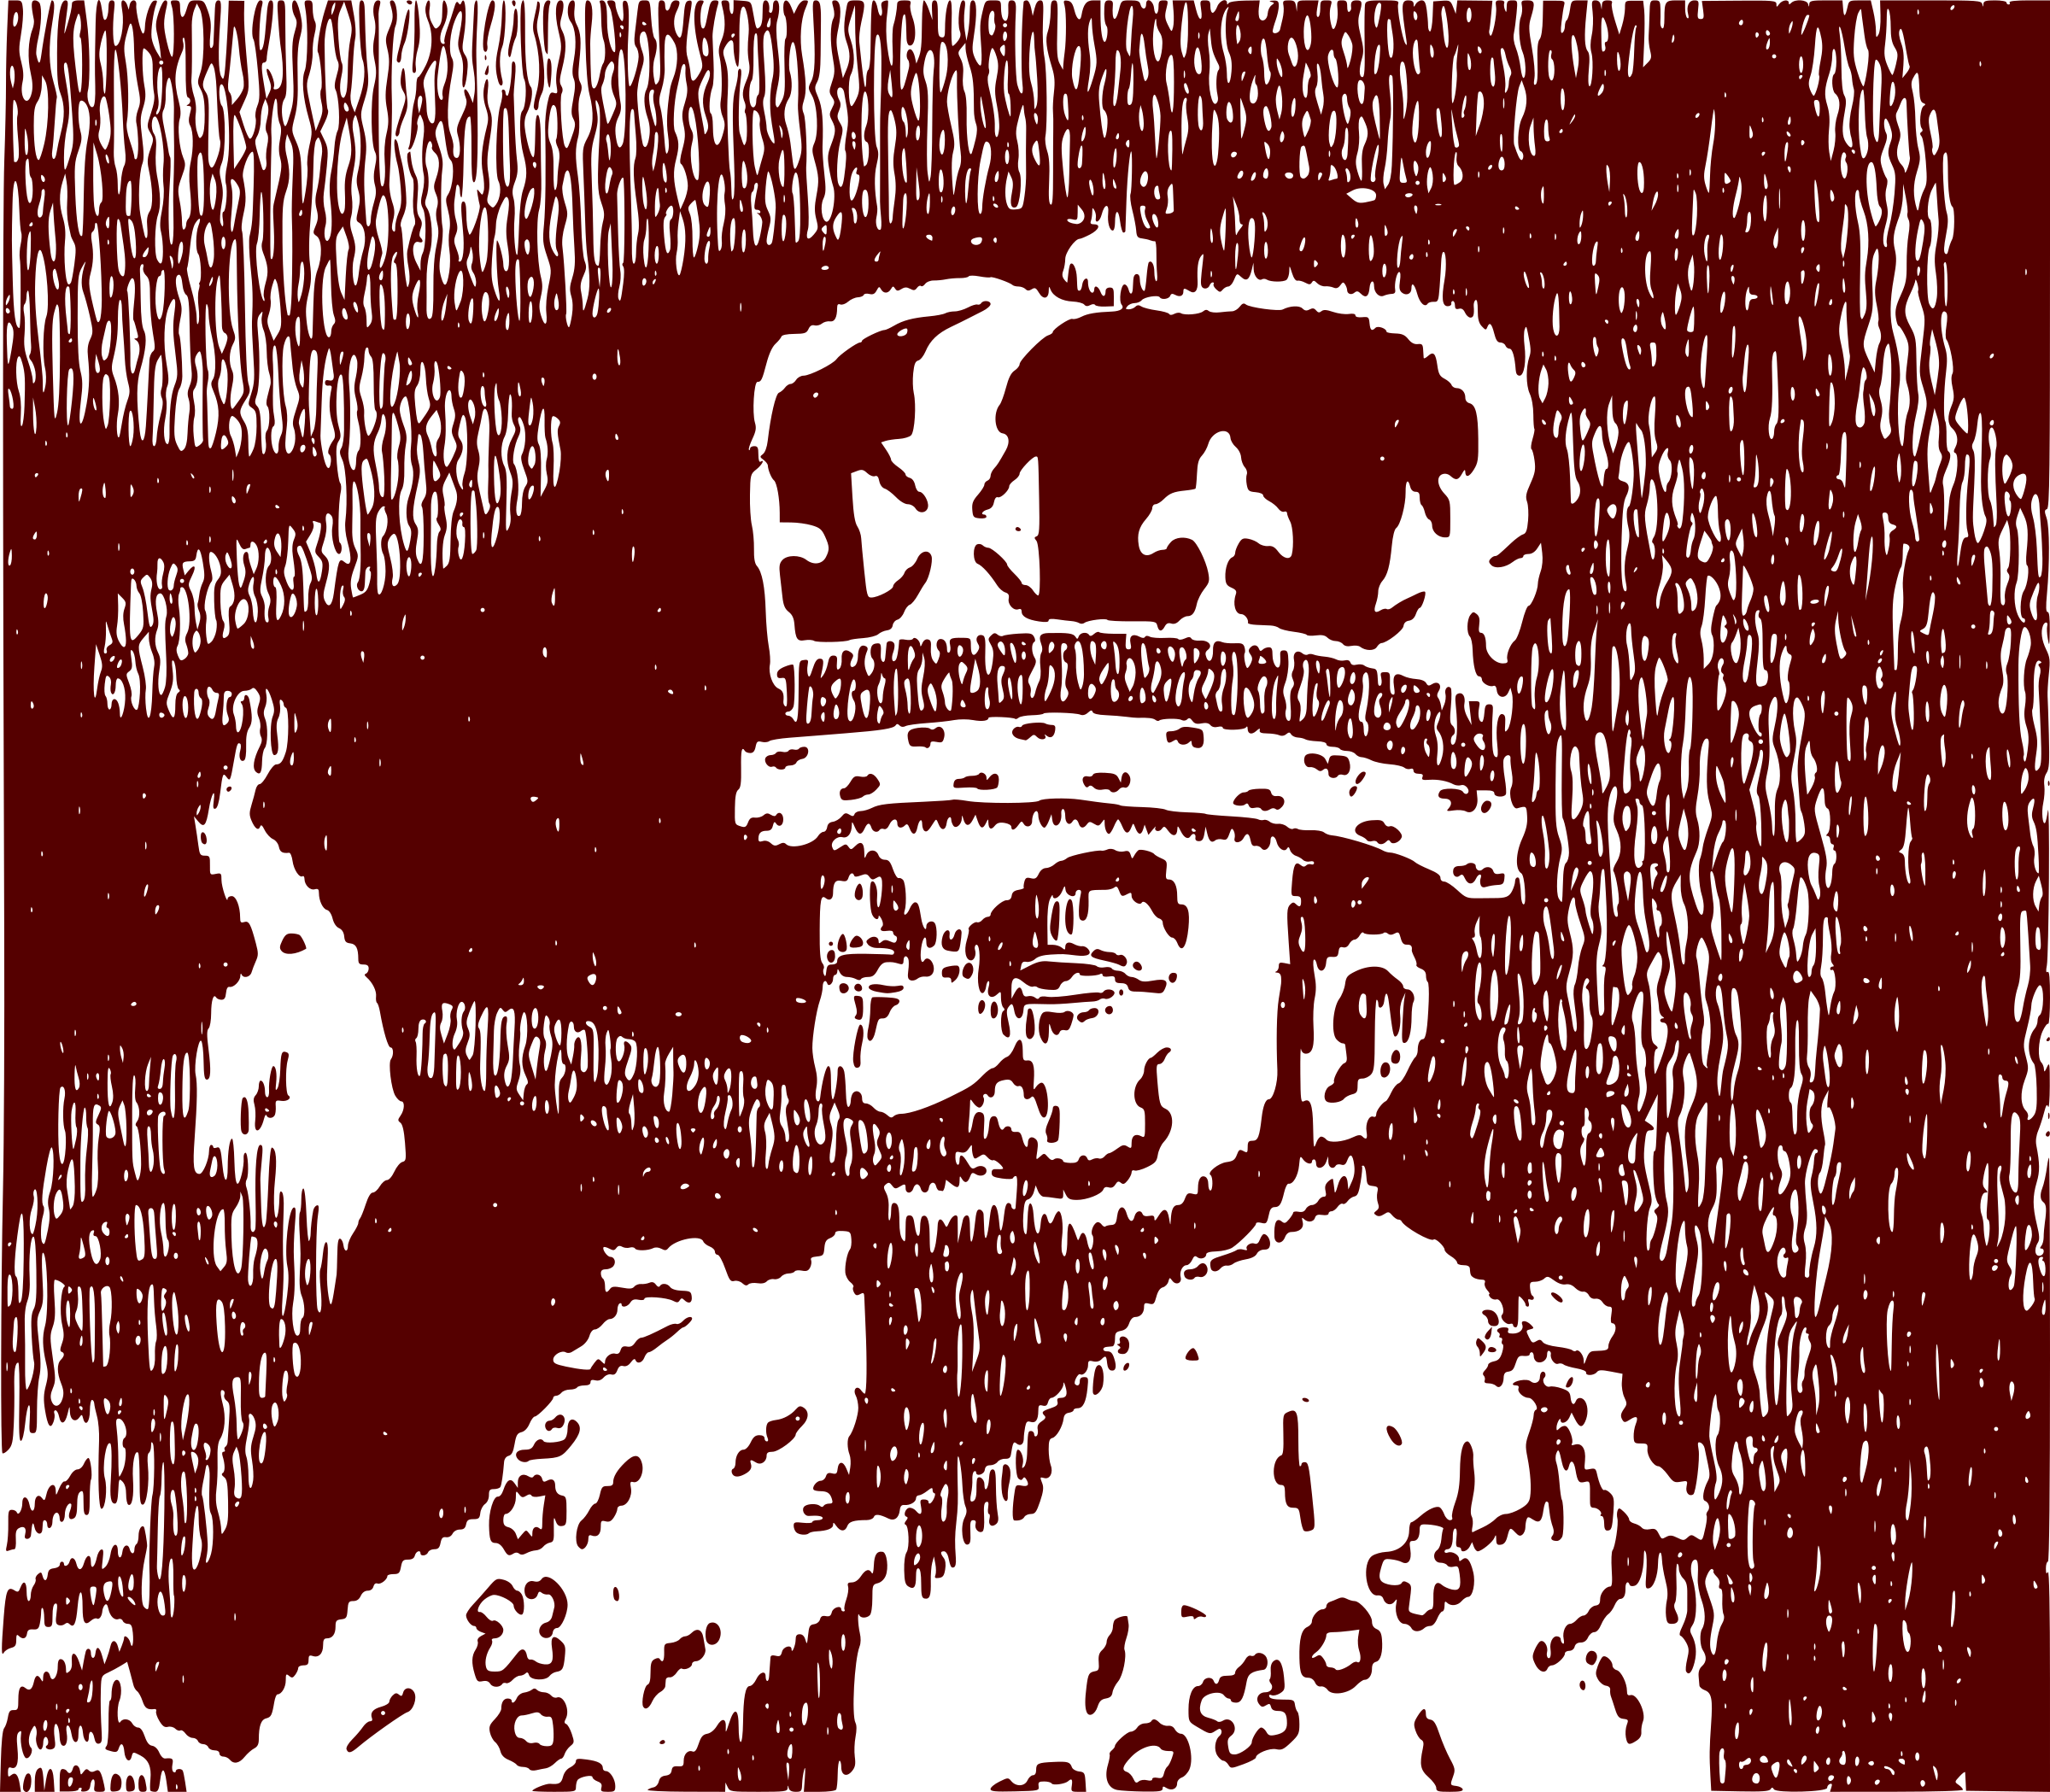 king clipart rich king